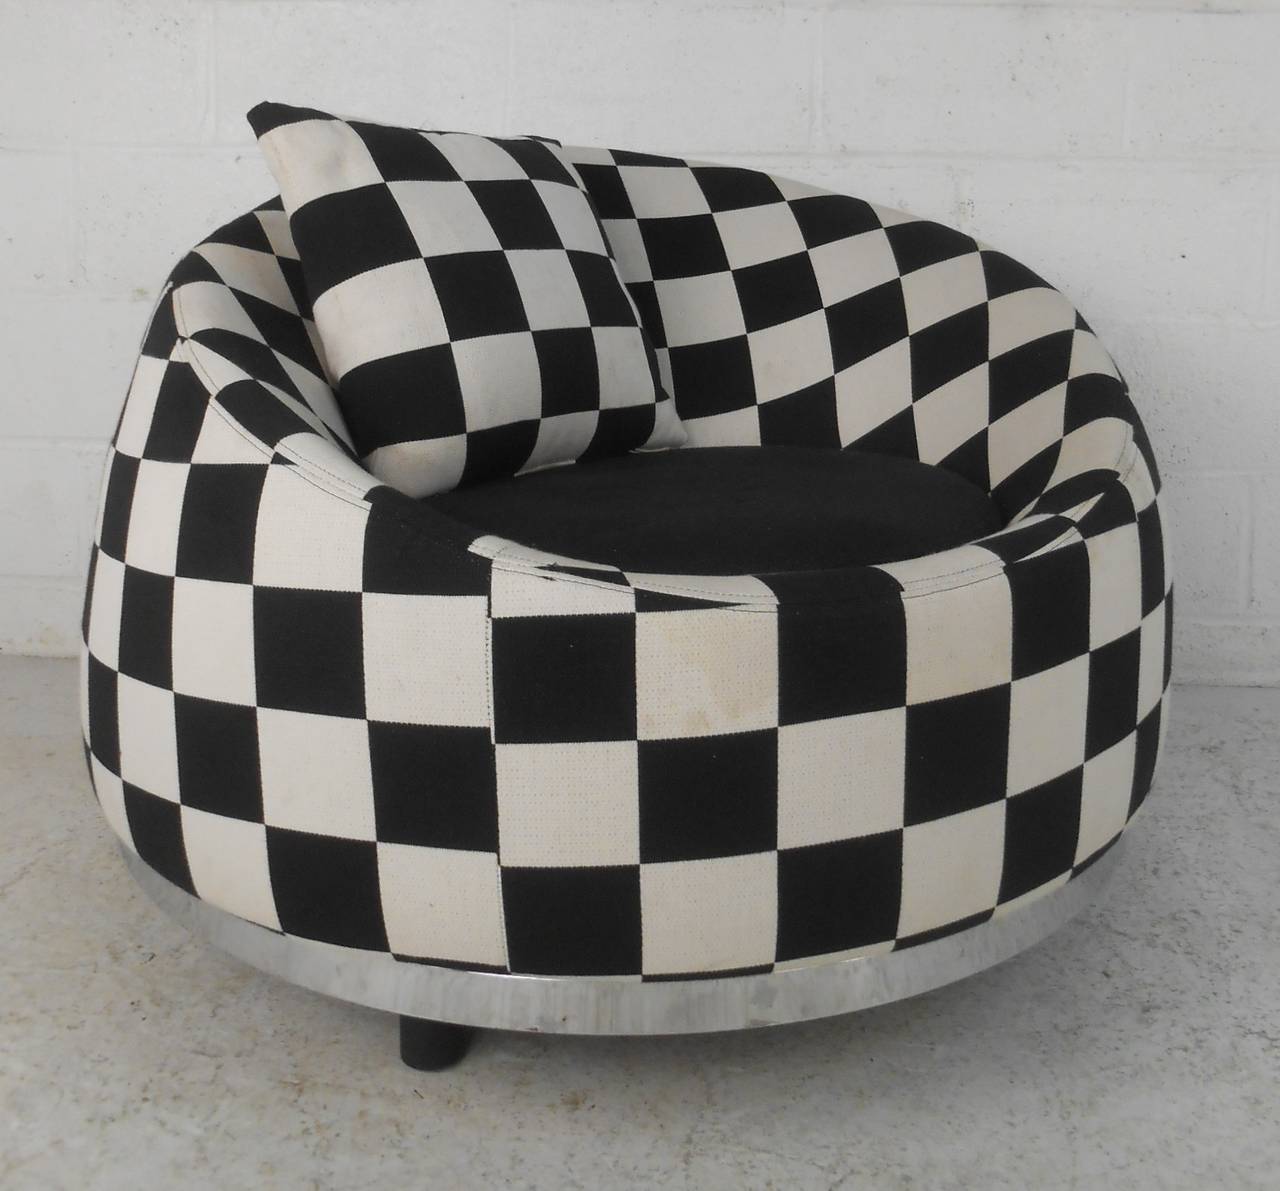 This stylish contemporary modern club chair features chrome trim, black and white checkered upholstery, and uniquely shaped seat back. Very comfortable, Italian made tub chair with vibrant geometric pattern upholstery. Please confirm item location